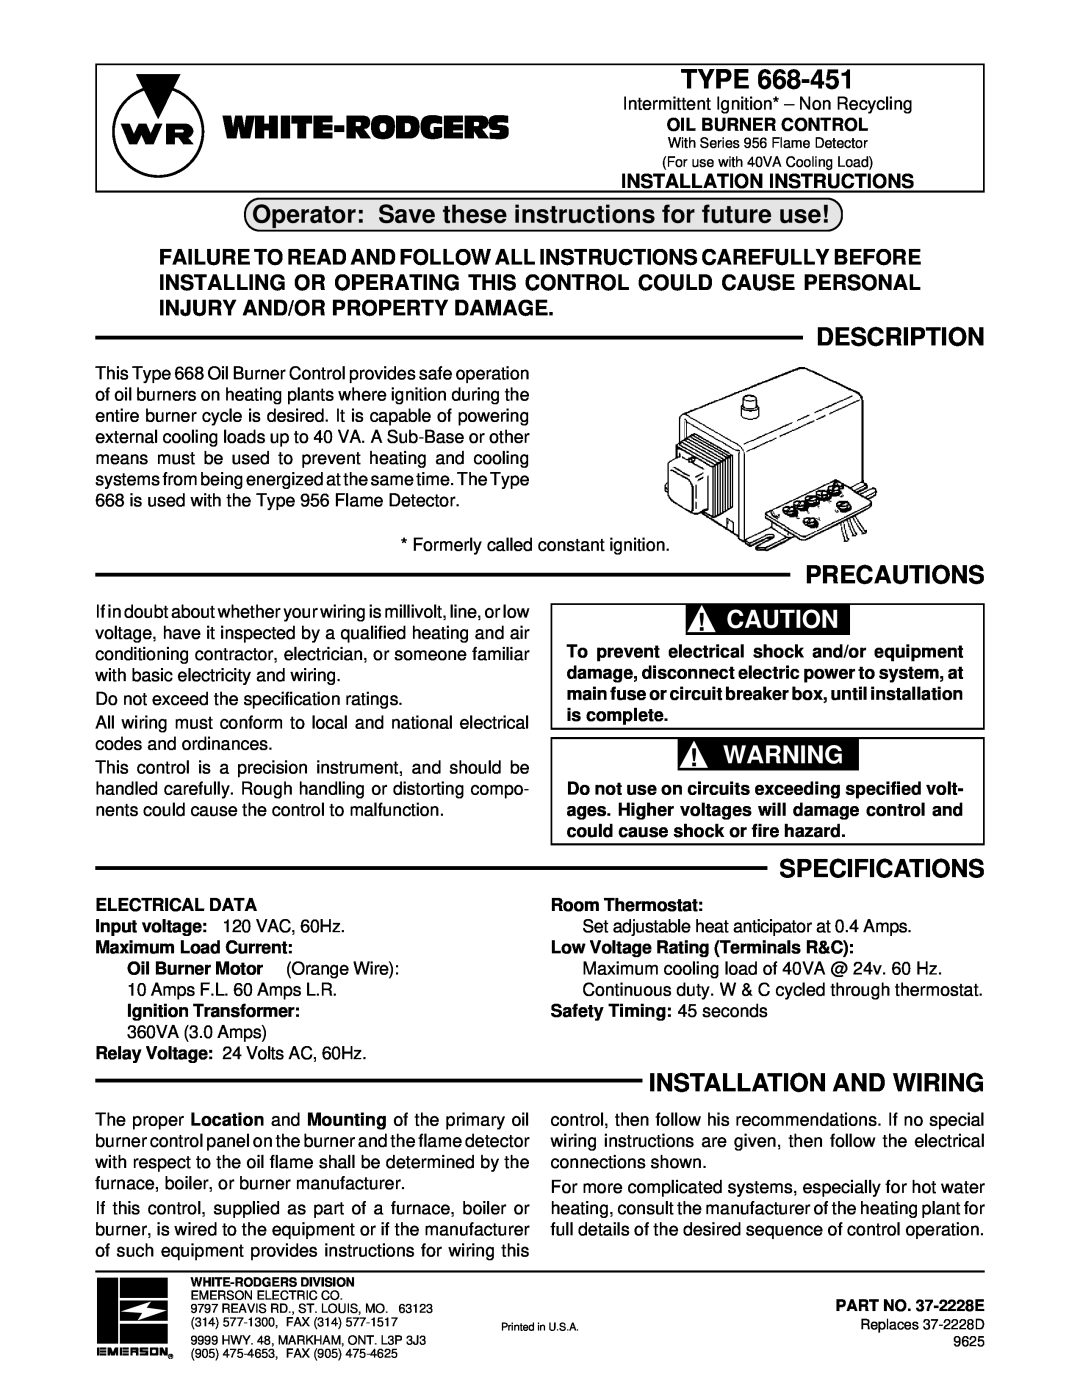 White Rodgers 668-451 installation instructions White-Rodgers, Operator Save these instructions for future use, Type 